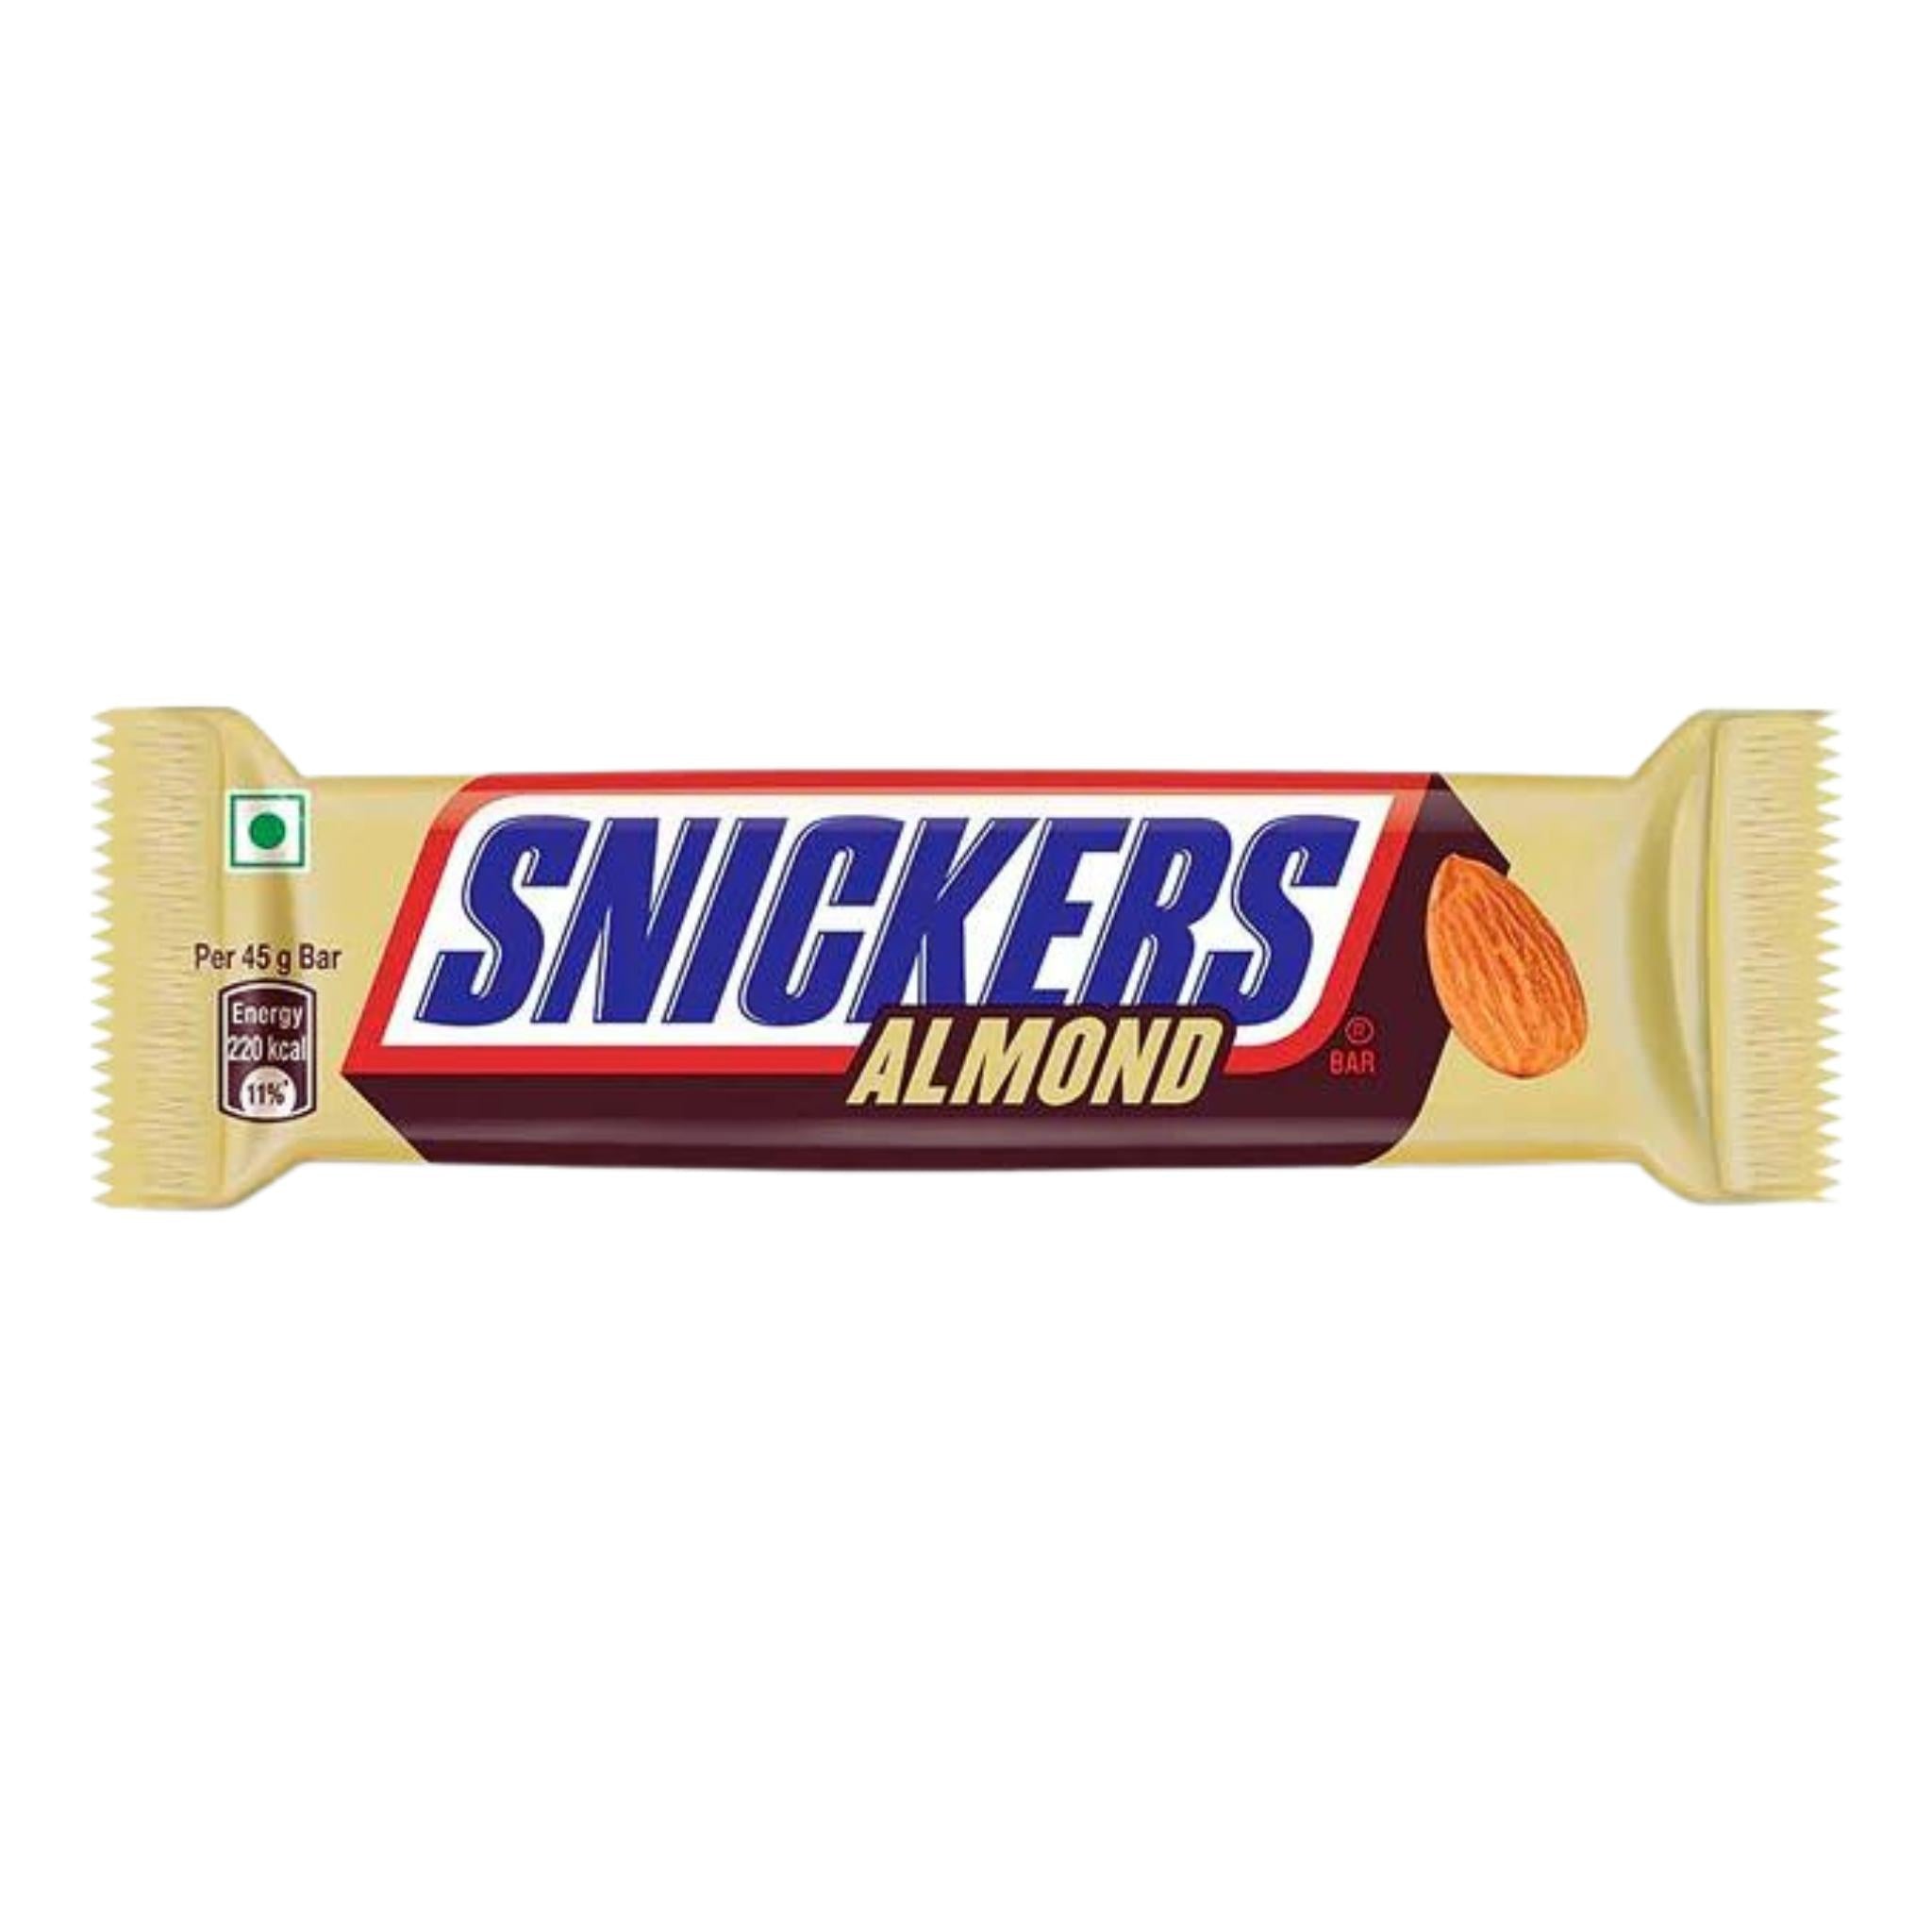 Snickers Almond - 45g